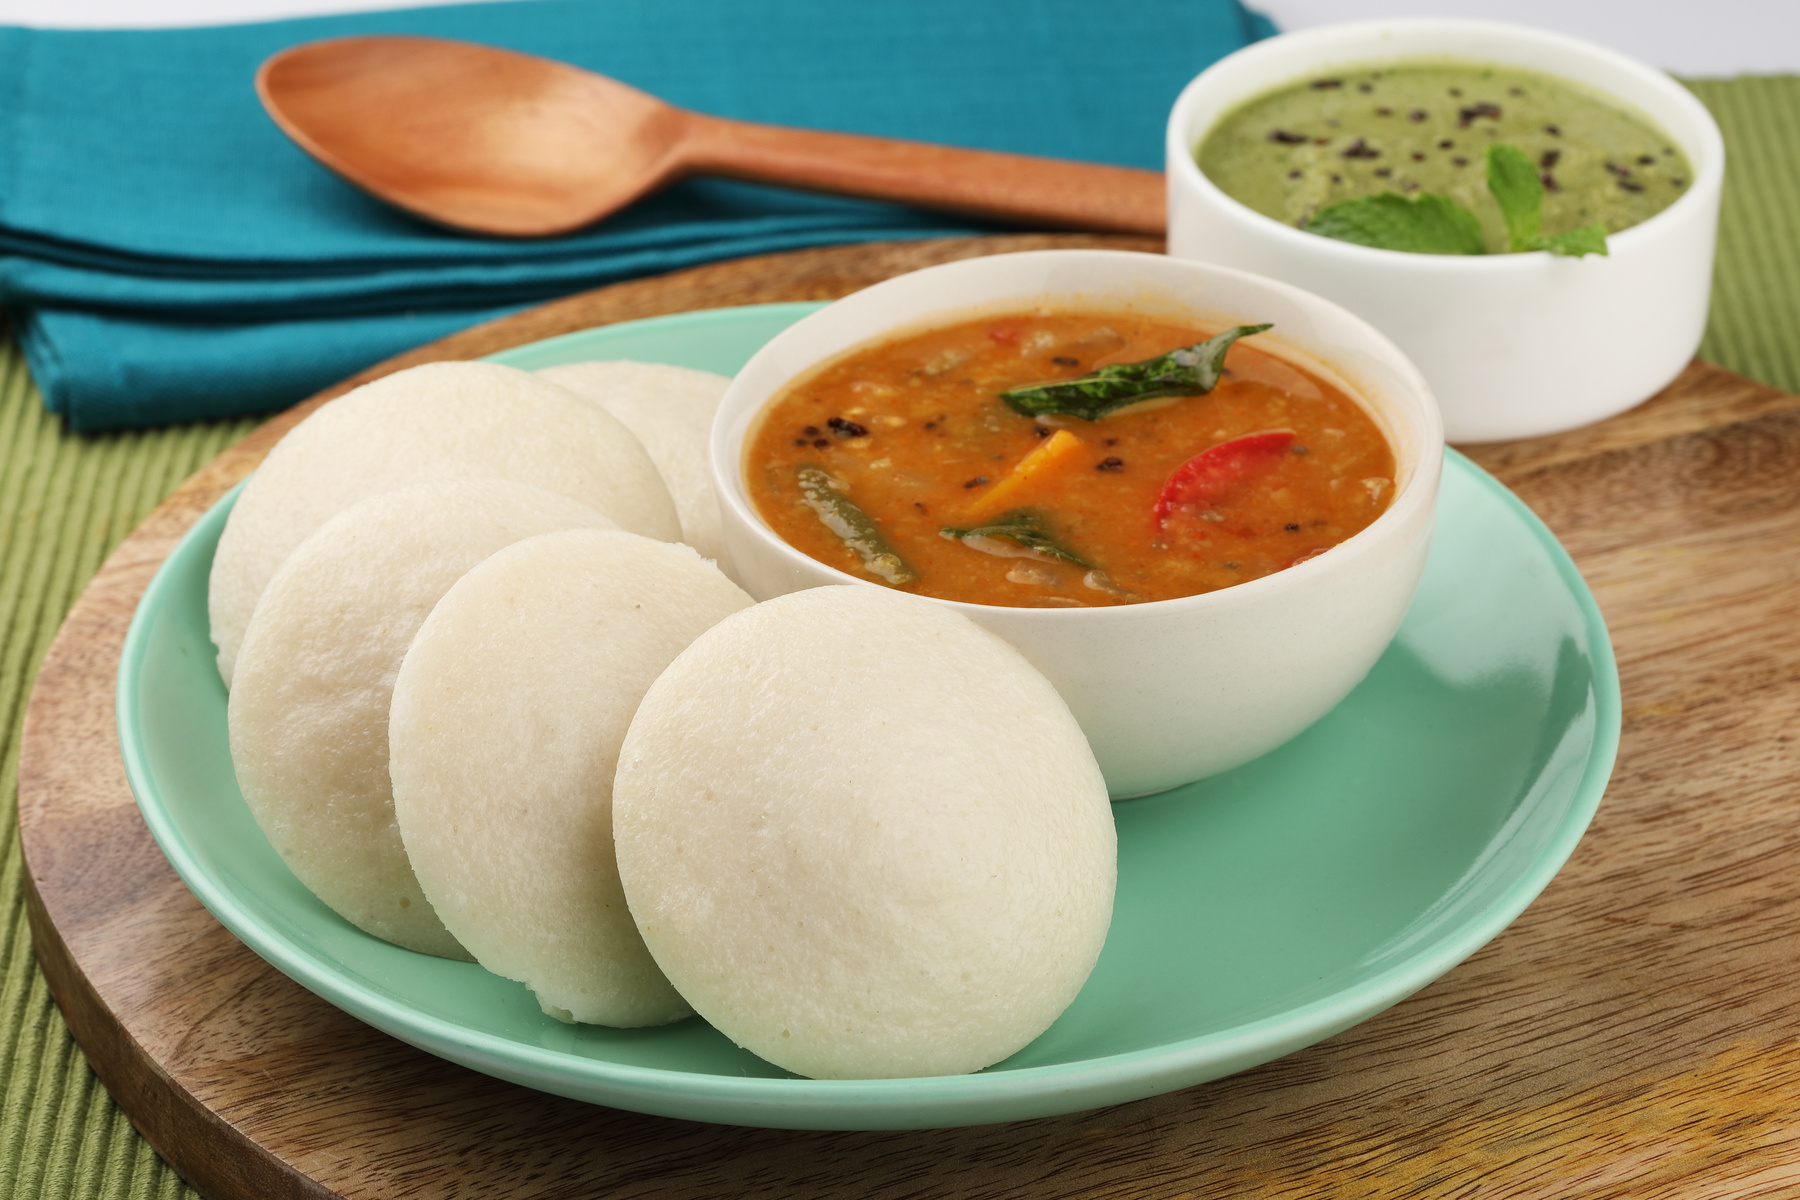 South Indian Breakfast Specialties at Raj's Corner - Authentic Flavors and Variety!